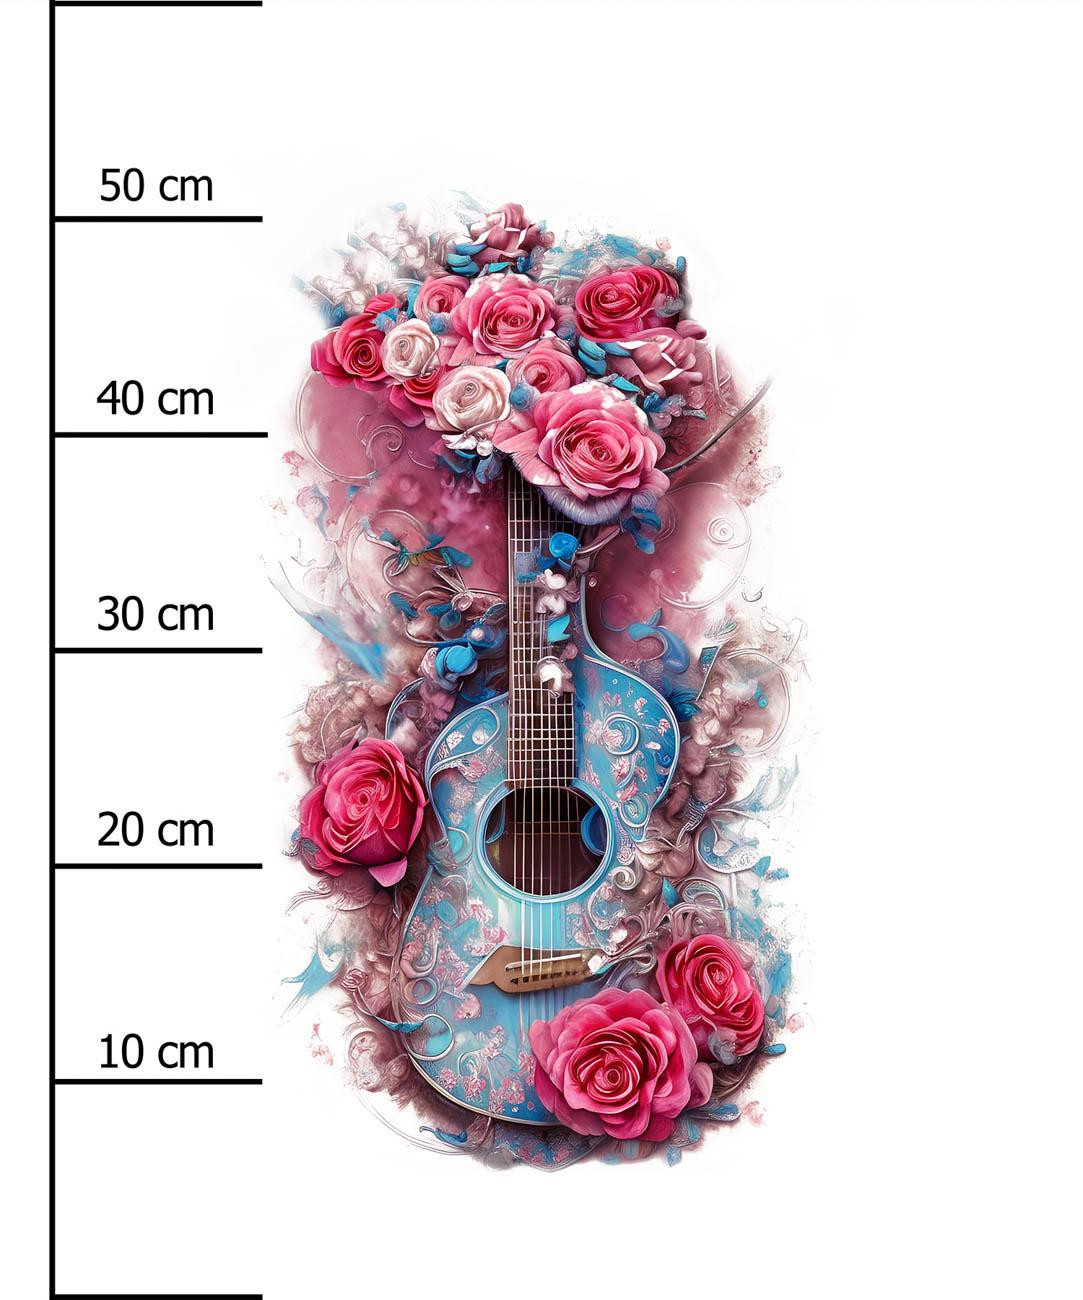 GUITAR WITH ROSES - panel (60cm x 50cm) lycra 300g